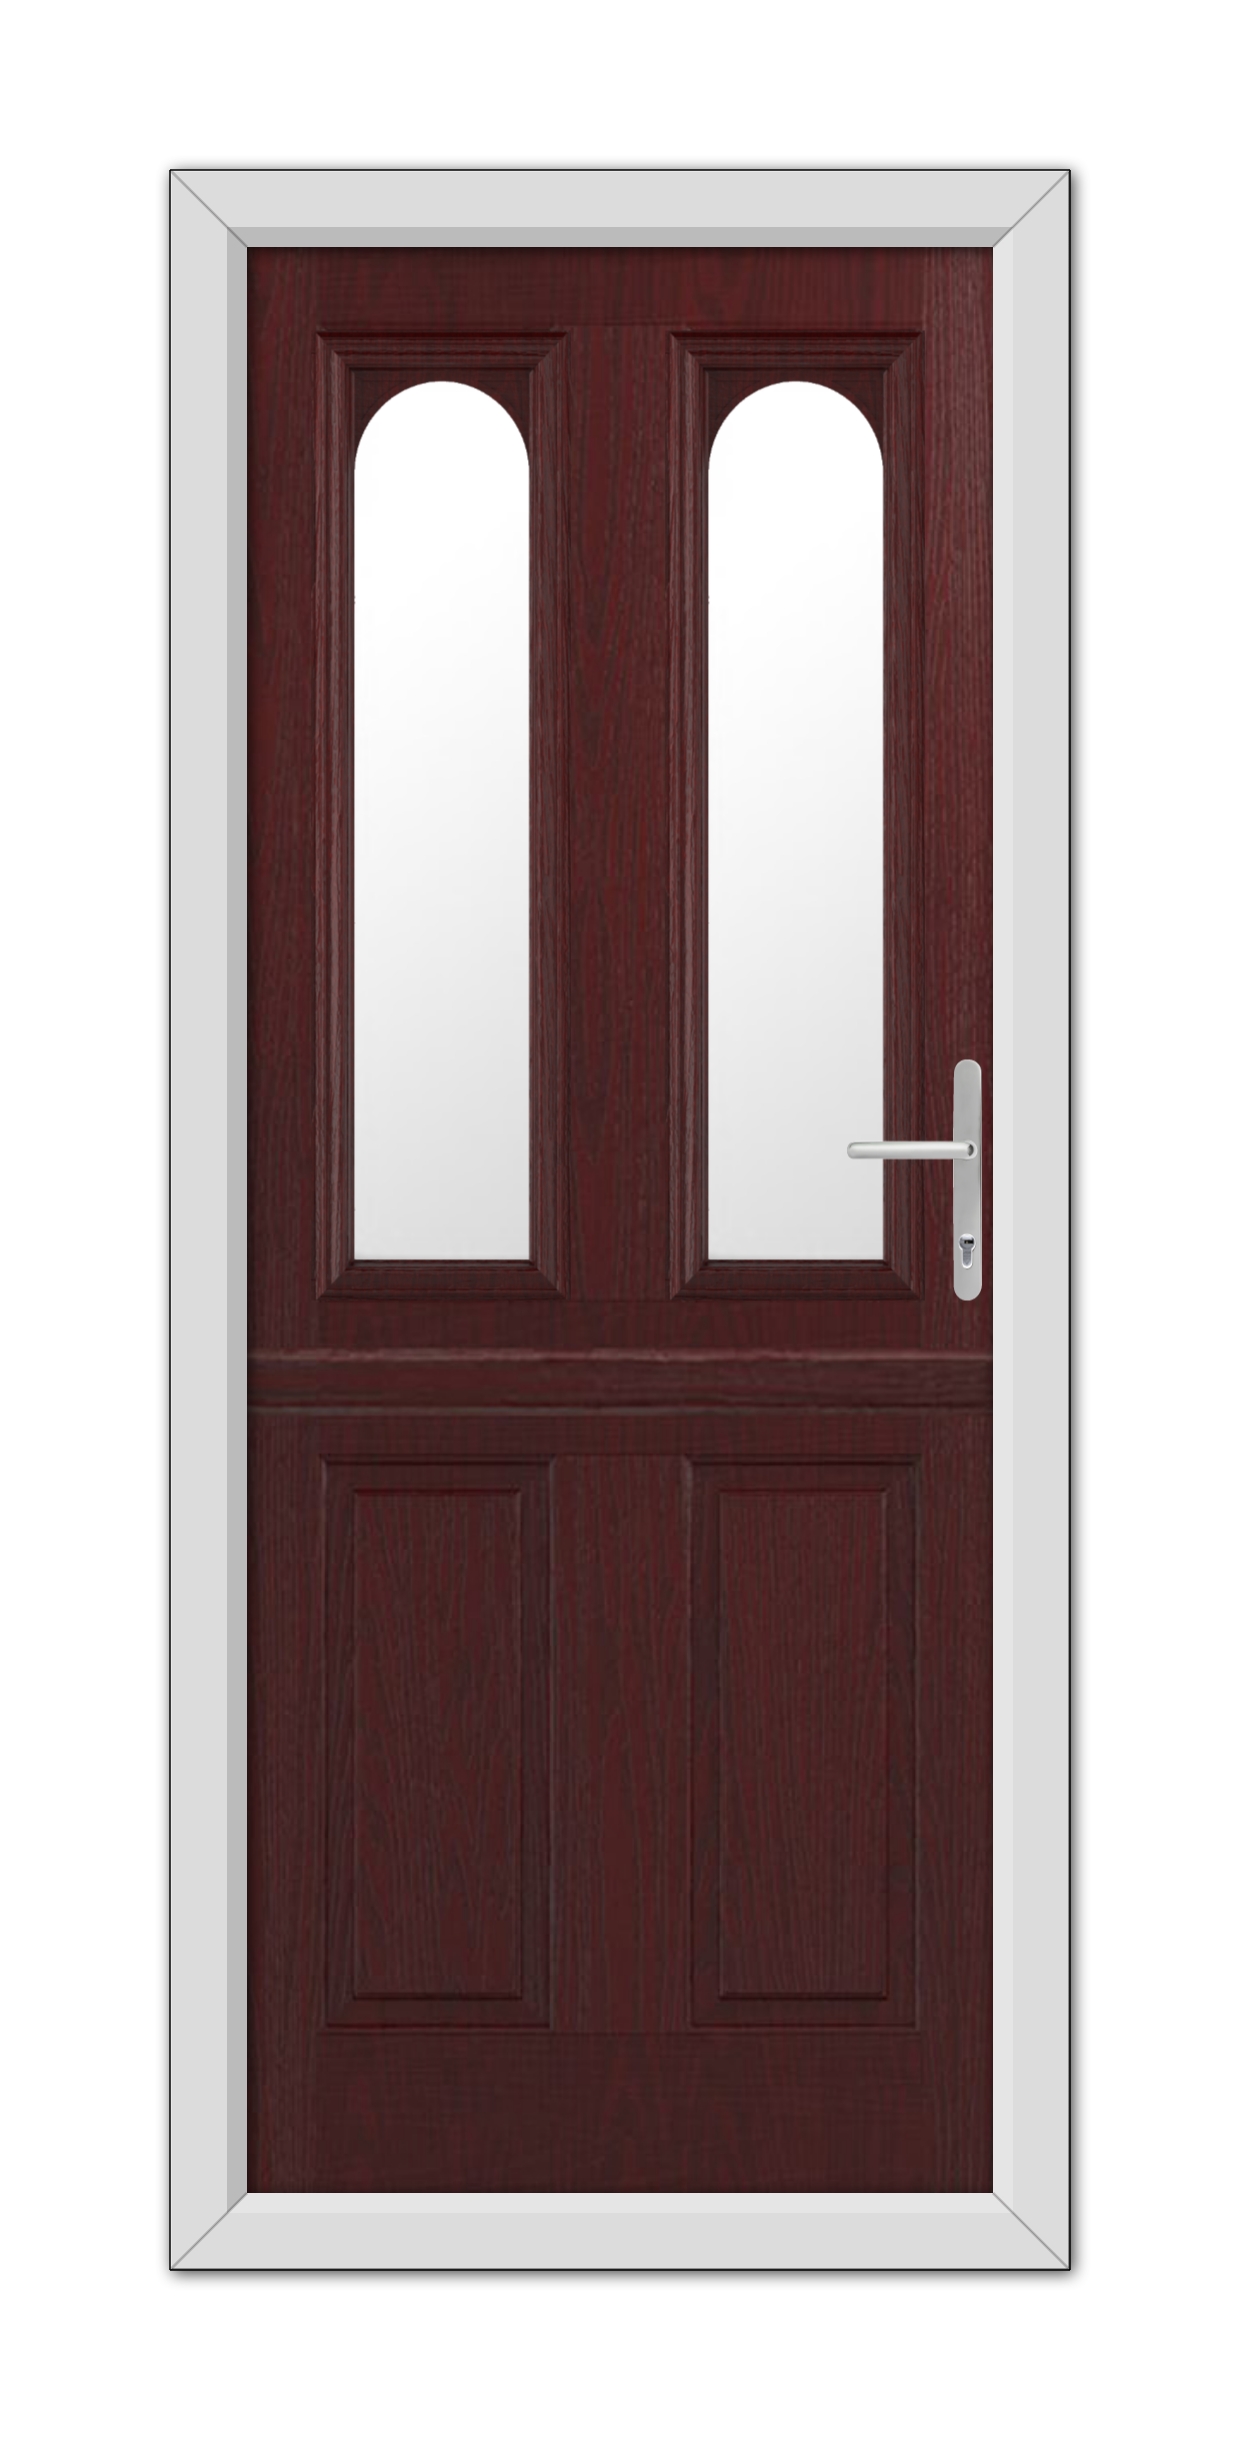 A Rosewood Elmhurst Stable Composite Door 48mm Timber Core with dual vertical glass panels and a silver handle, set within a white frame.